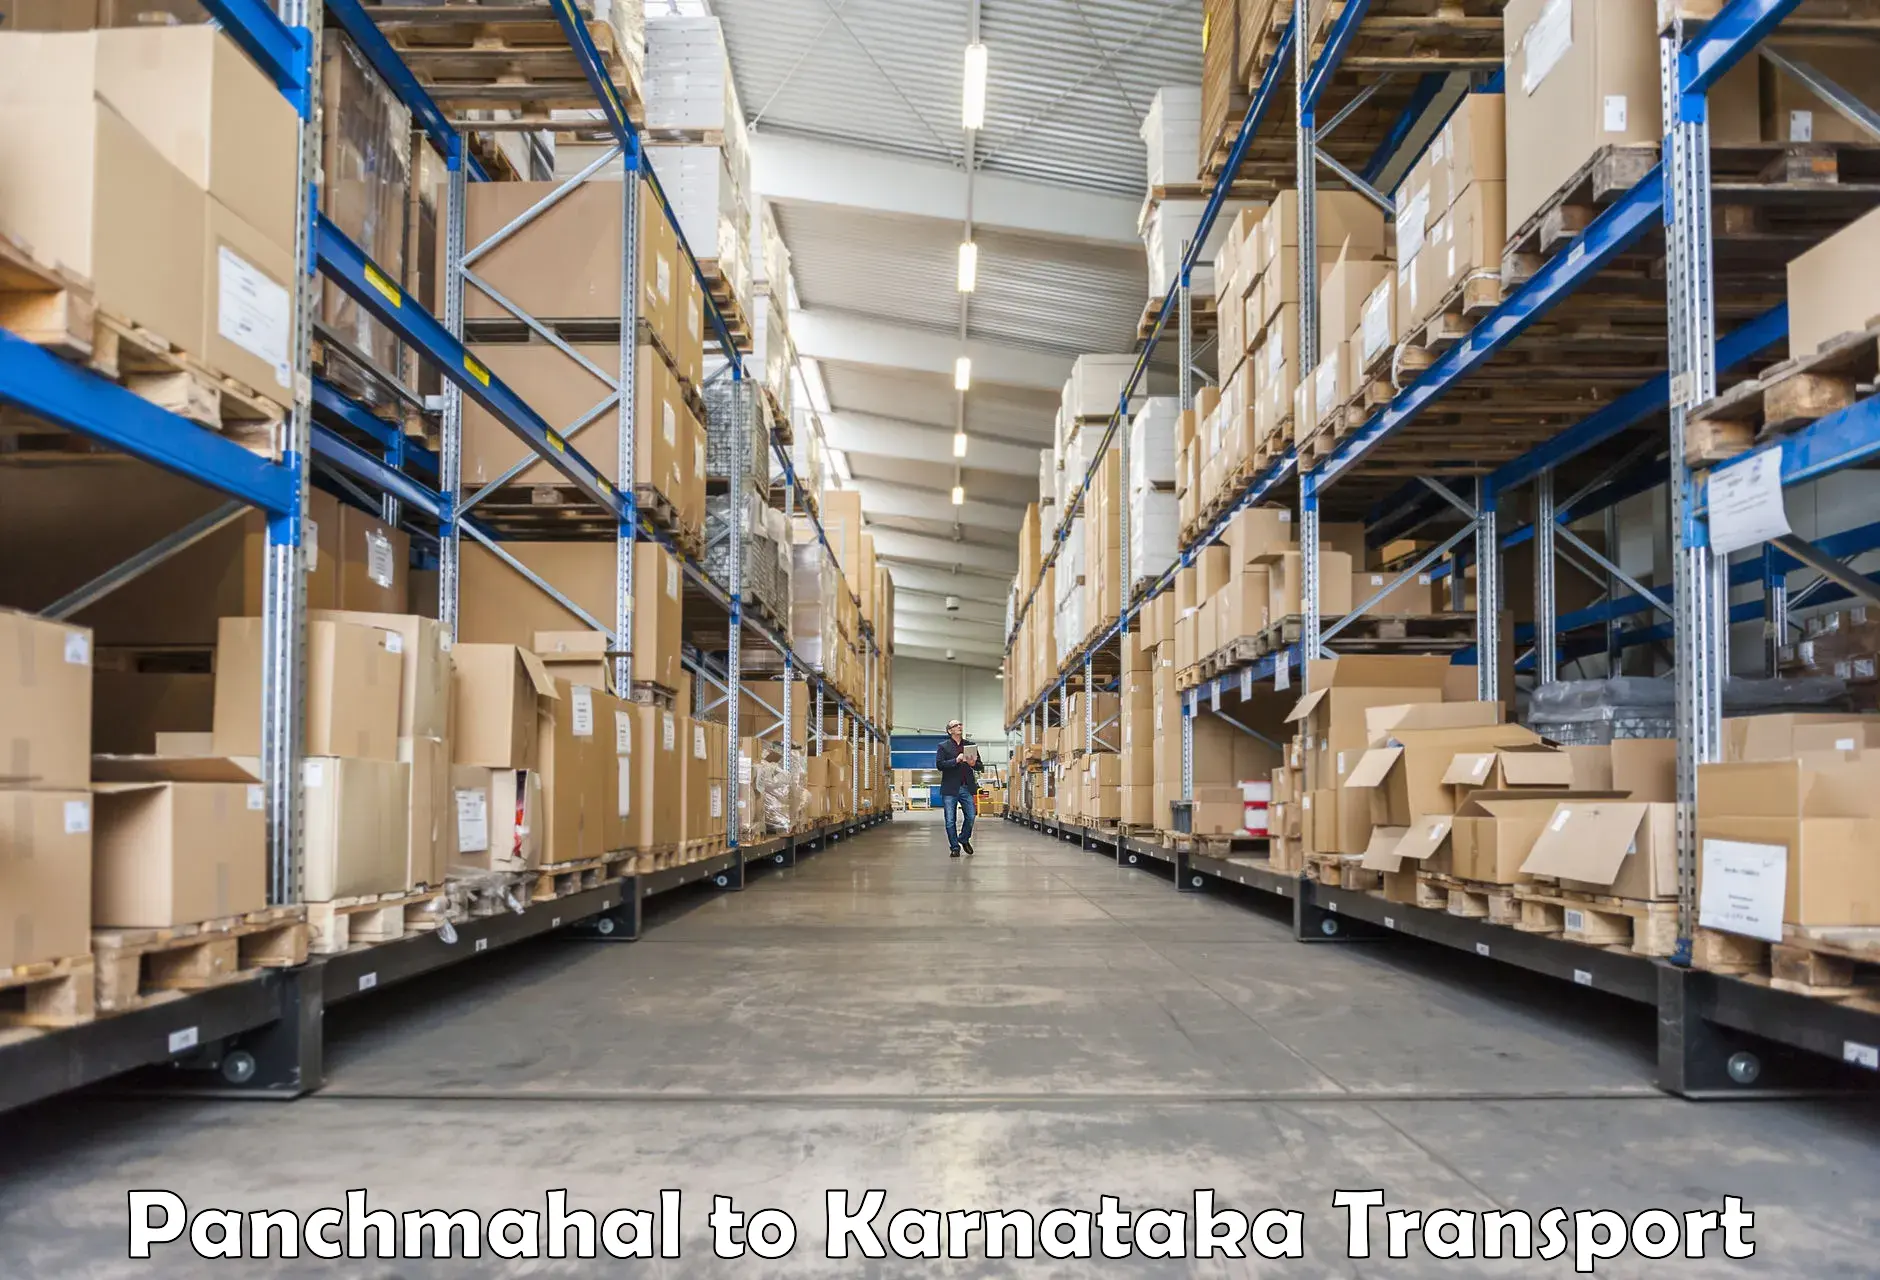 Transport shared services Panchmahal to Gulbarga